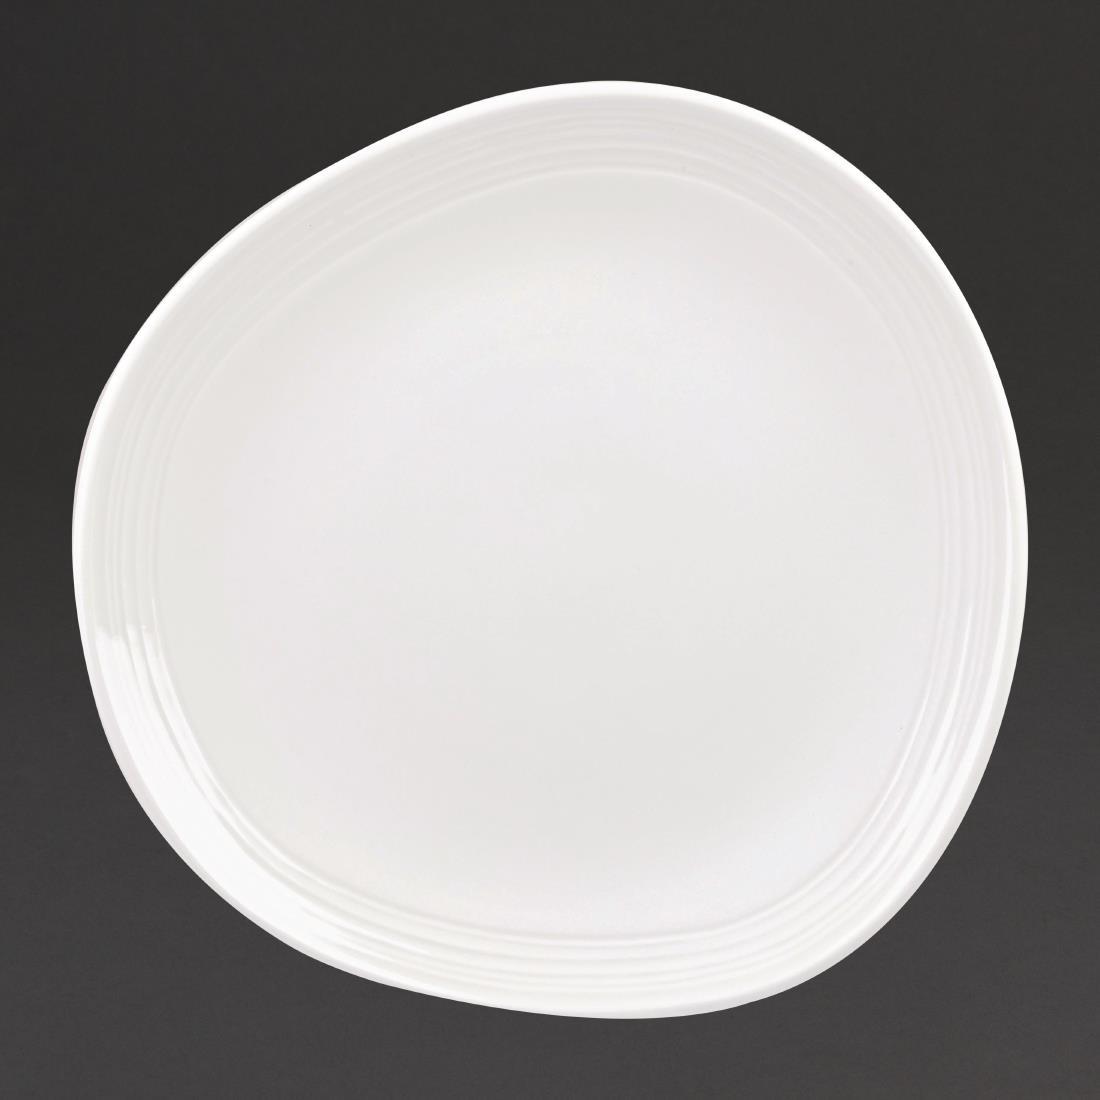 Churchill Discover Round Plates White 264mm (Pack of 12) - CS065  - 1